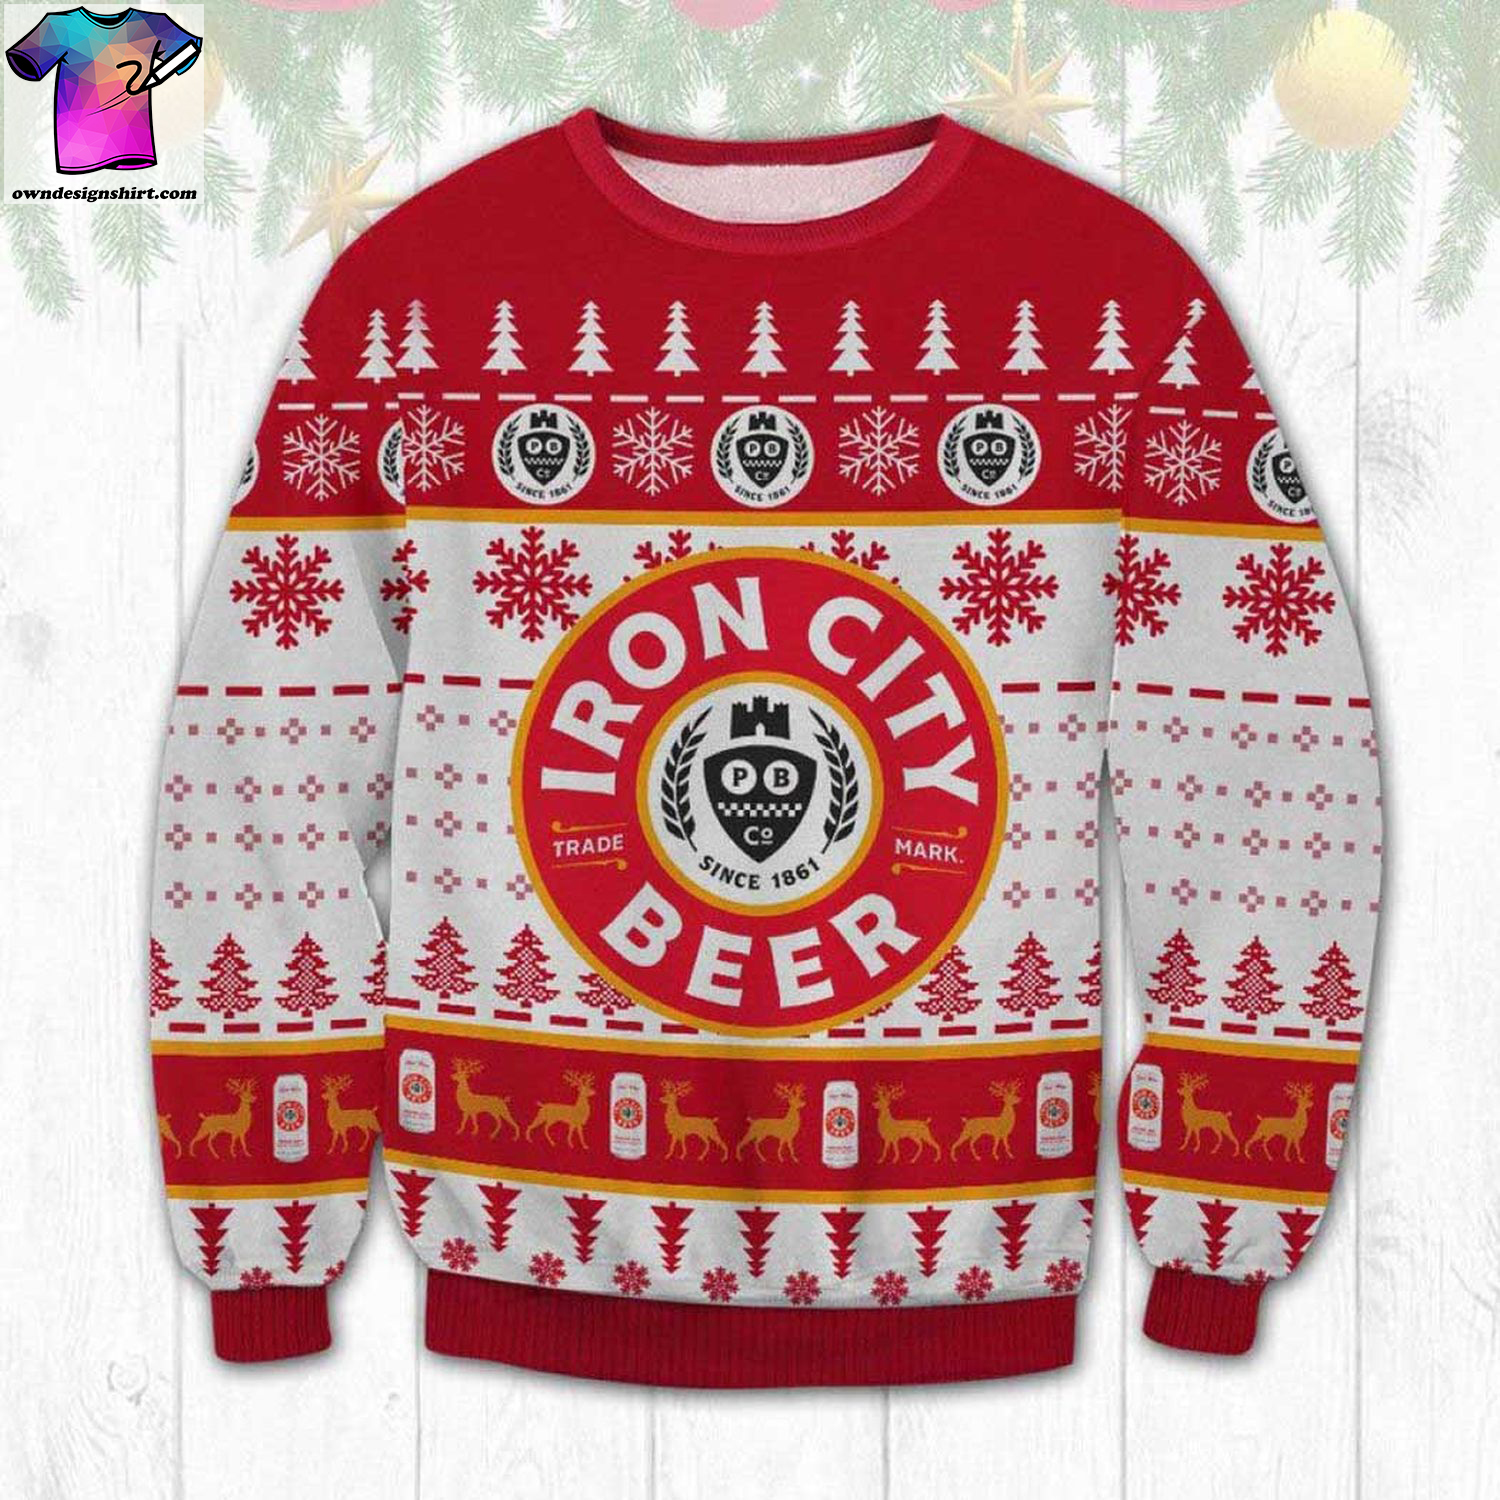 Iron city beer pittsburgh brewing ugly christmas sweater